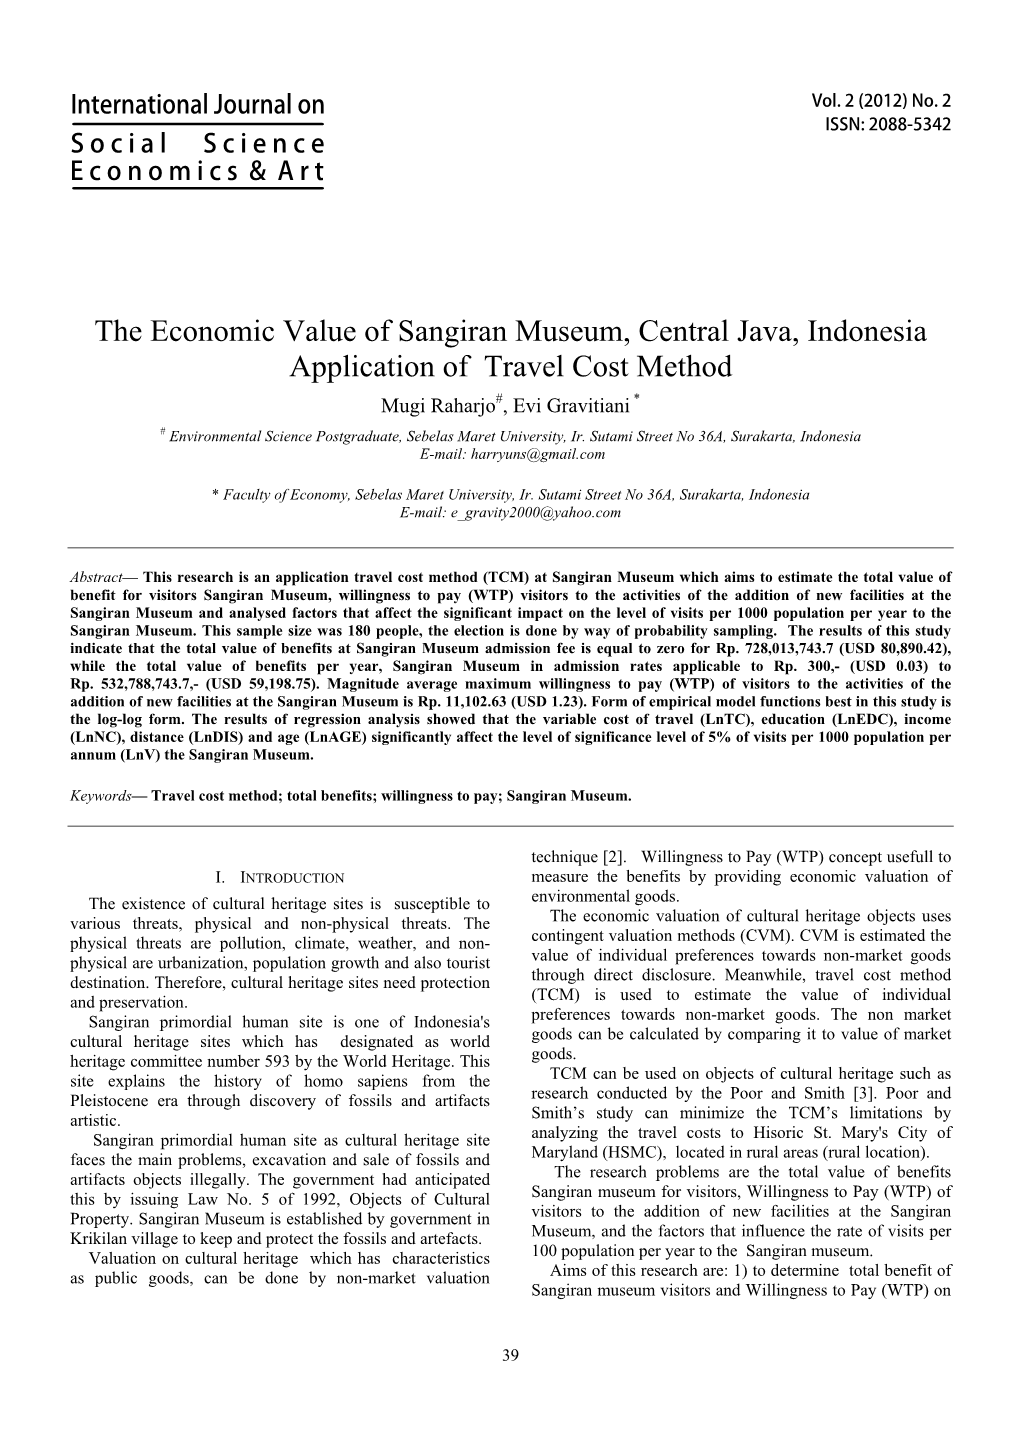 The Economic Value of Sangiran Museum, Central Java, Indonesia Application of Travel Cost Method